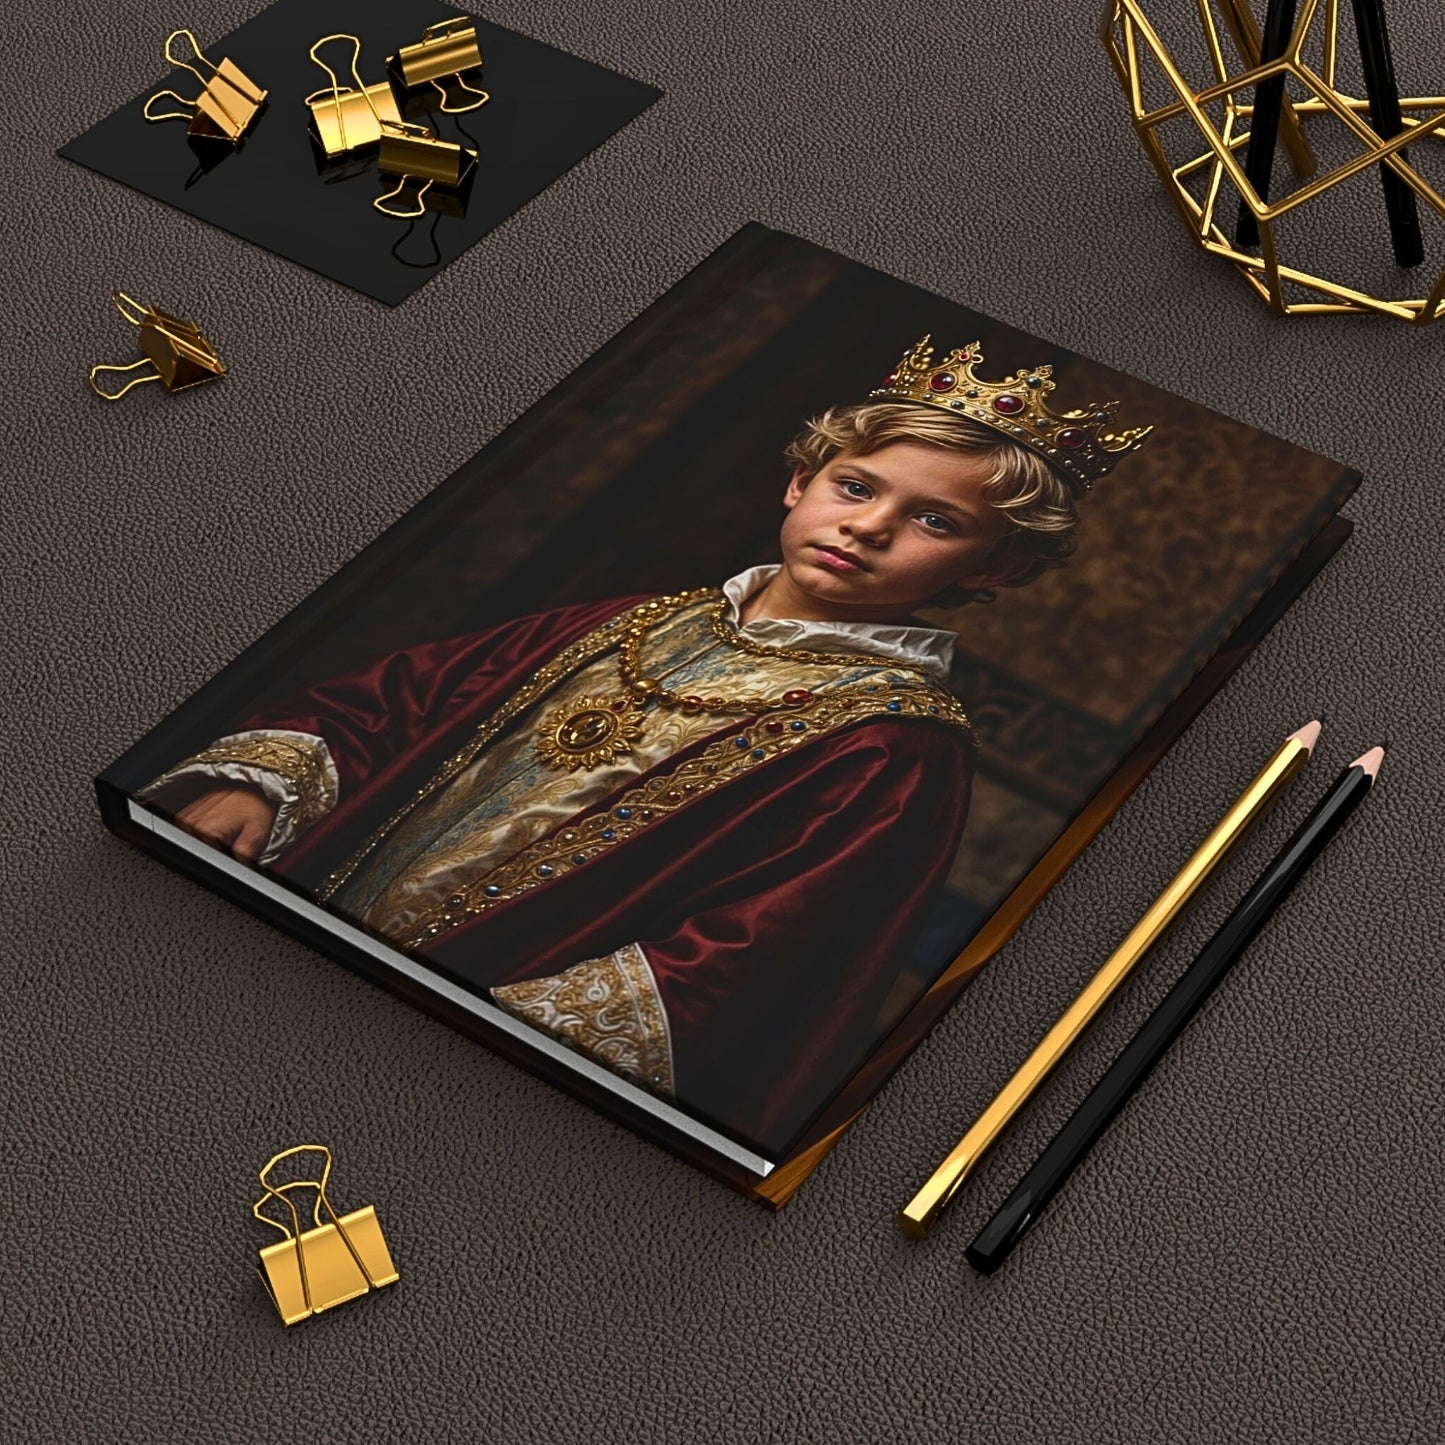 our Custom Kids Royal Journal from Photo, a distinguished homage that transforms your child’s photograph into an extraordinary piece of personalized artistry. This journal seamlessly blends the timeless elegance of historical portraiture with modern customization, offering a unique way to celebrate your child’s individuality.